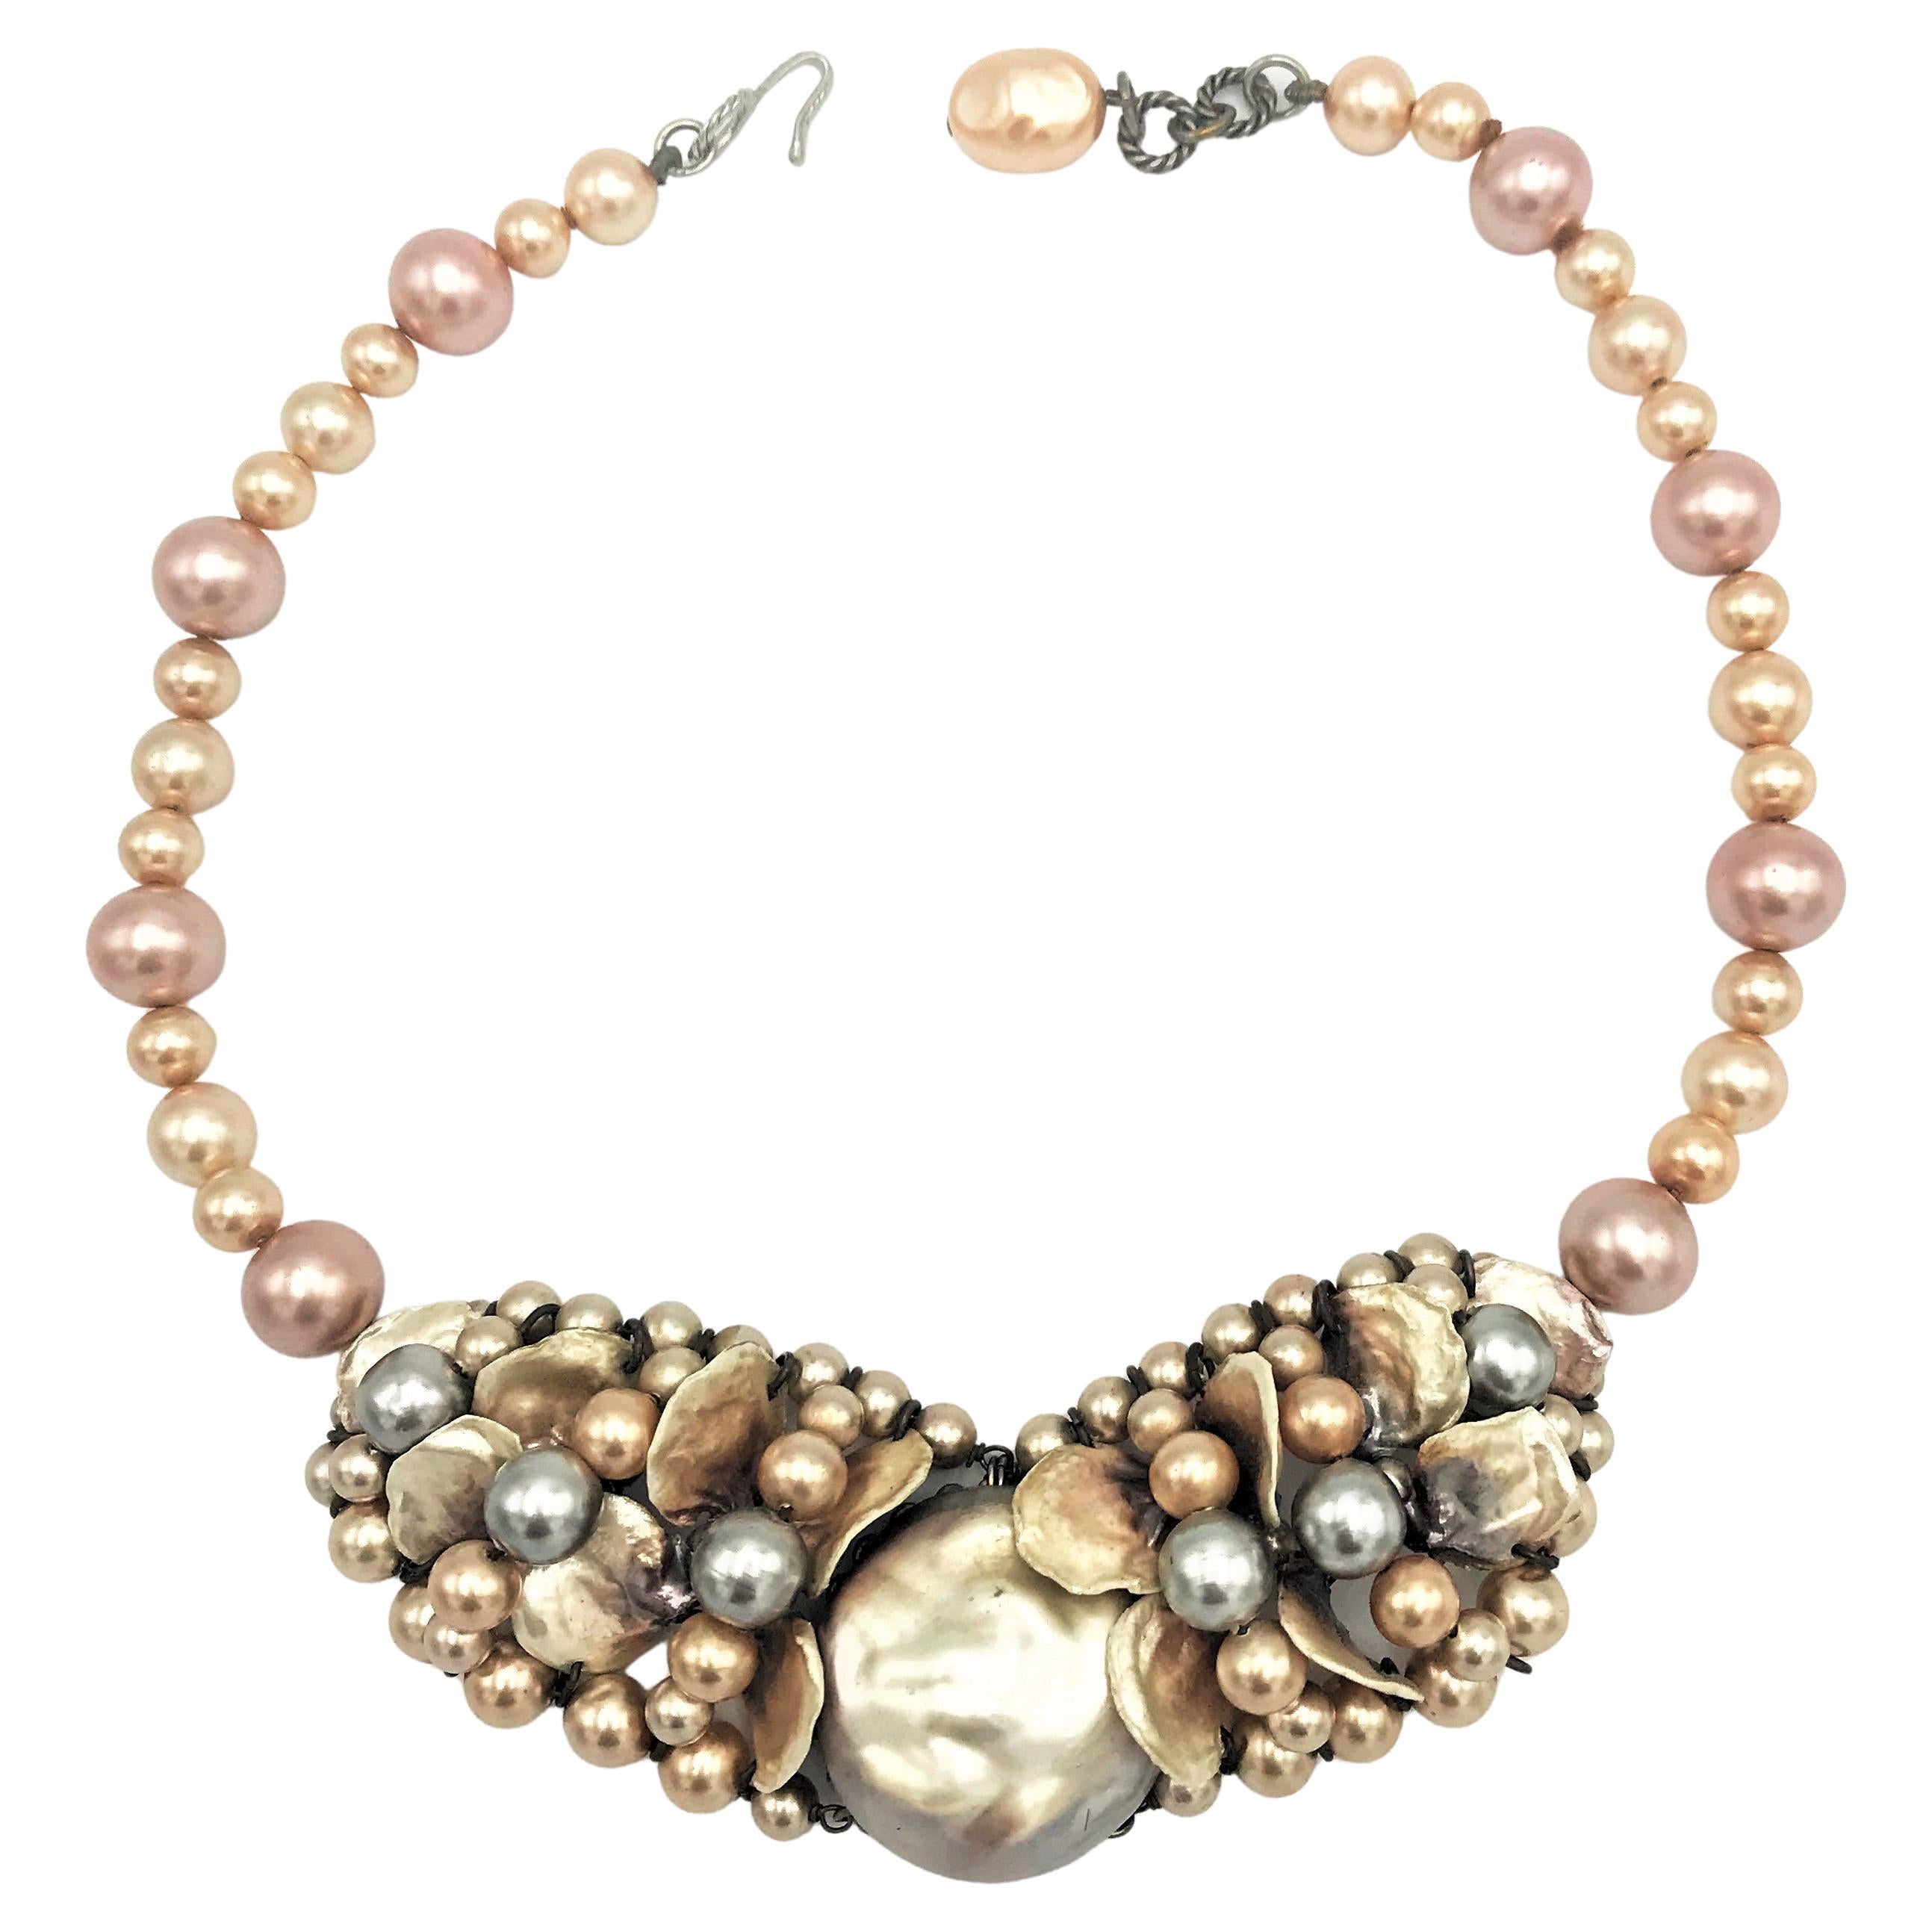 Attributed to Louis Rousselet, born 1892-1980 in Paris.
This lovely vintage necklace date to the late 1950/60, made of simulated pearls of silver and rose. It's unsigned which is typical for Rousselet pieces as they were usually only singed on their